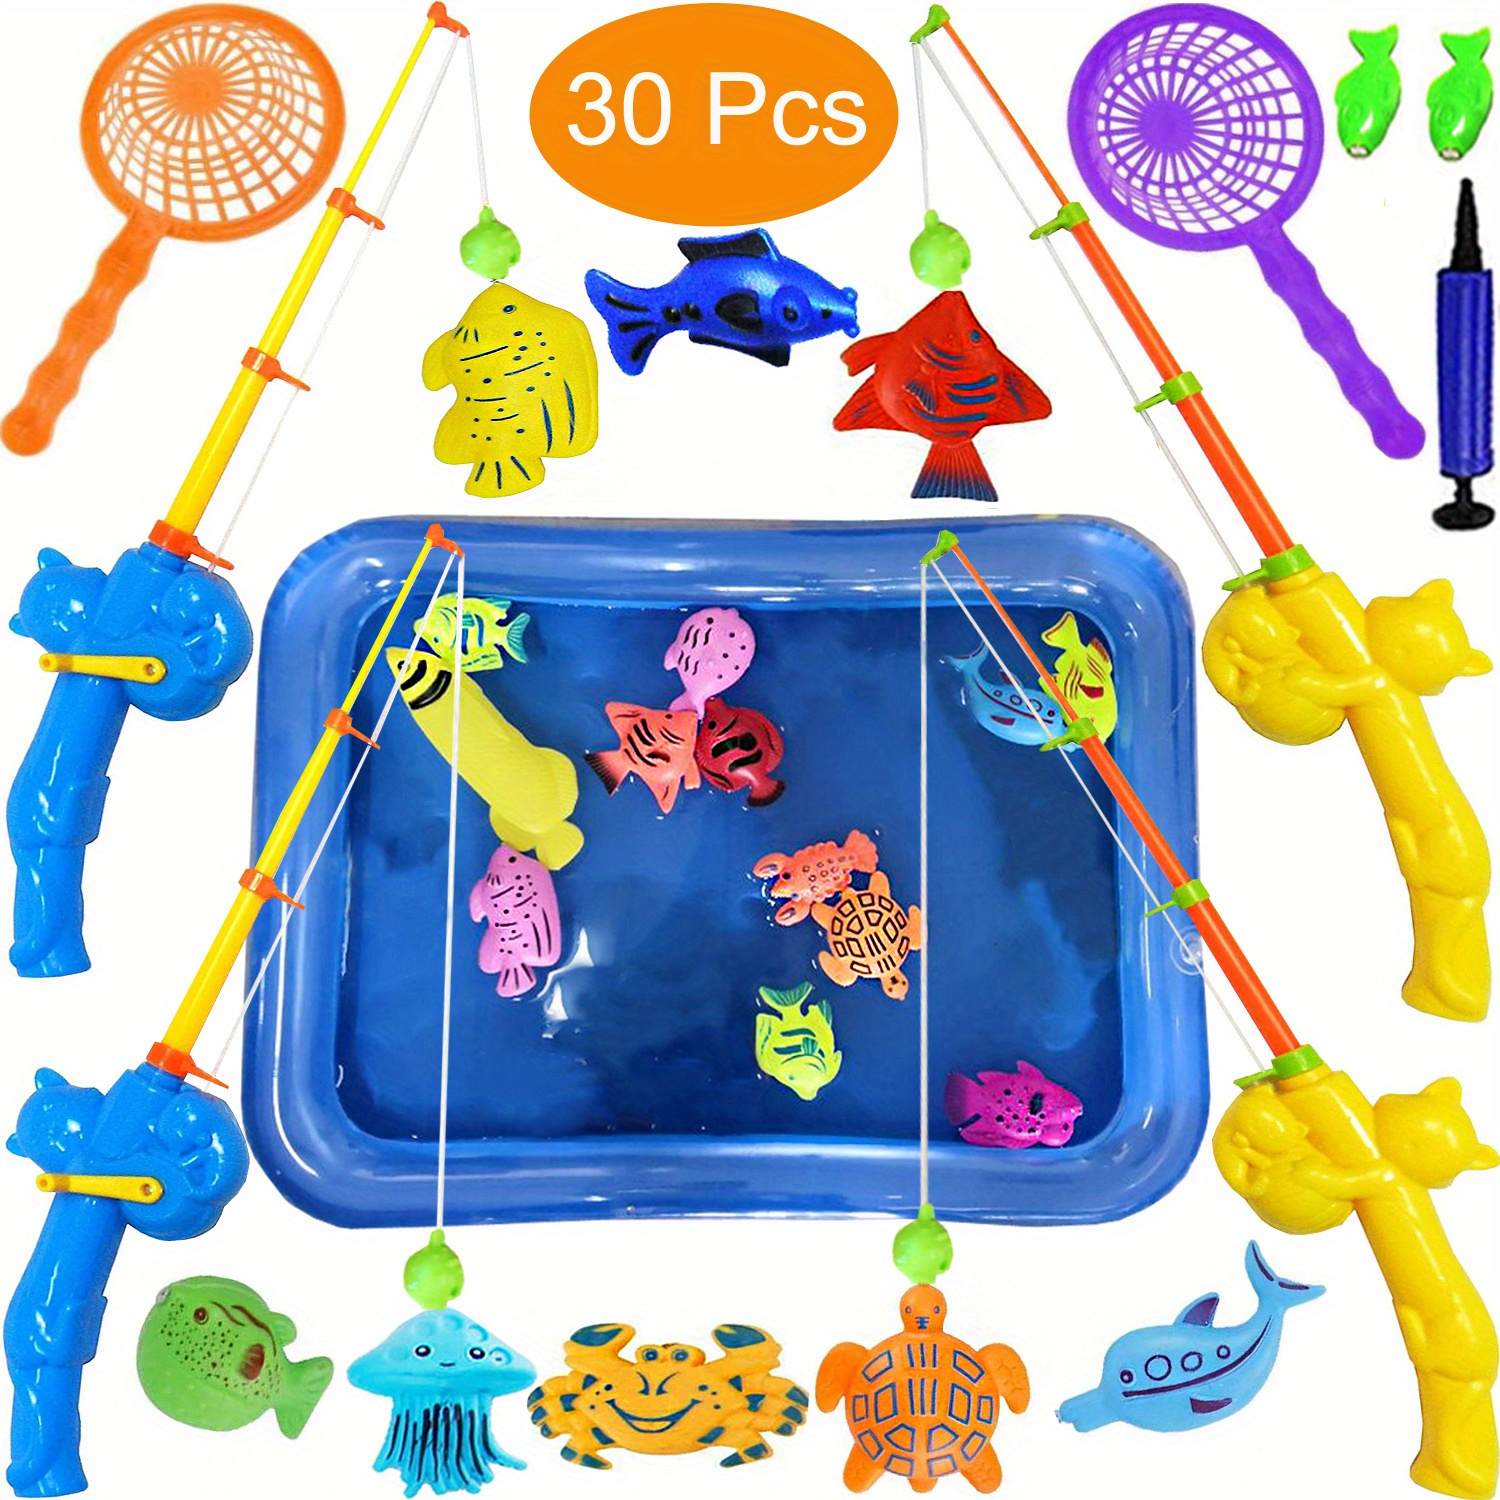 Kiditos Magnetic Fishing Toys Game Set with 4 Bathtub Tub Toys, Water Table  Fish, Swimming Pool Toy, Colorful Ocean Sea Animals, Fishing Pole Rod Net,  Fishing Game for Toddler Kids Age 3